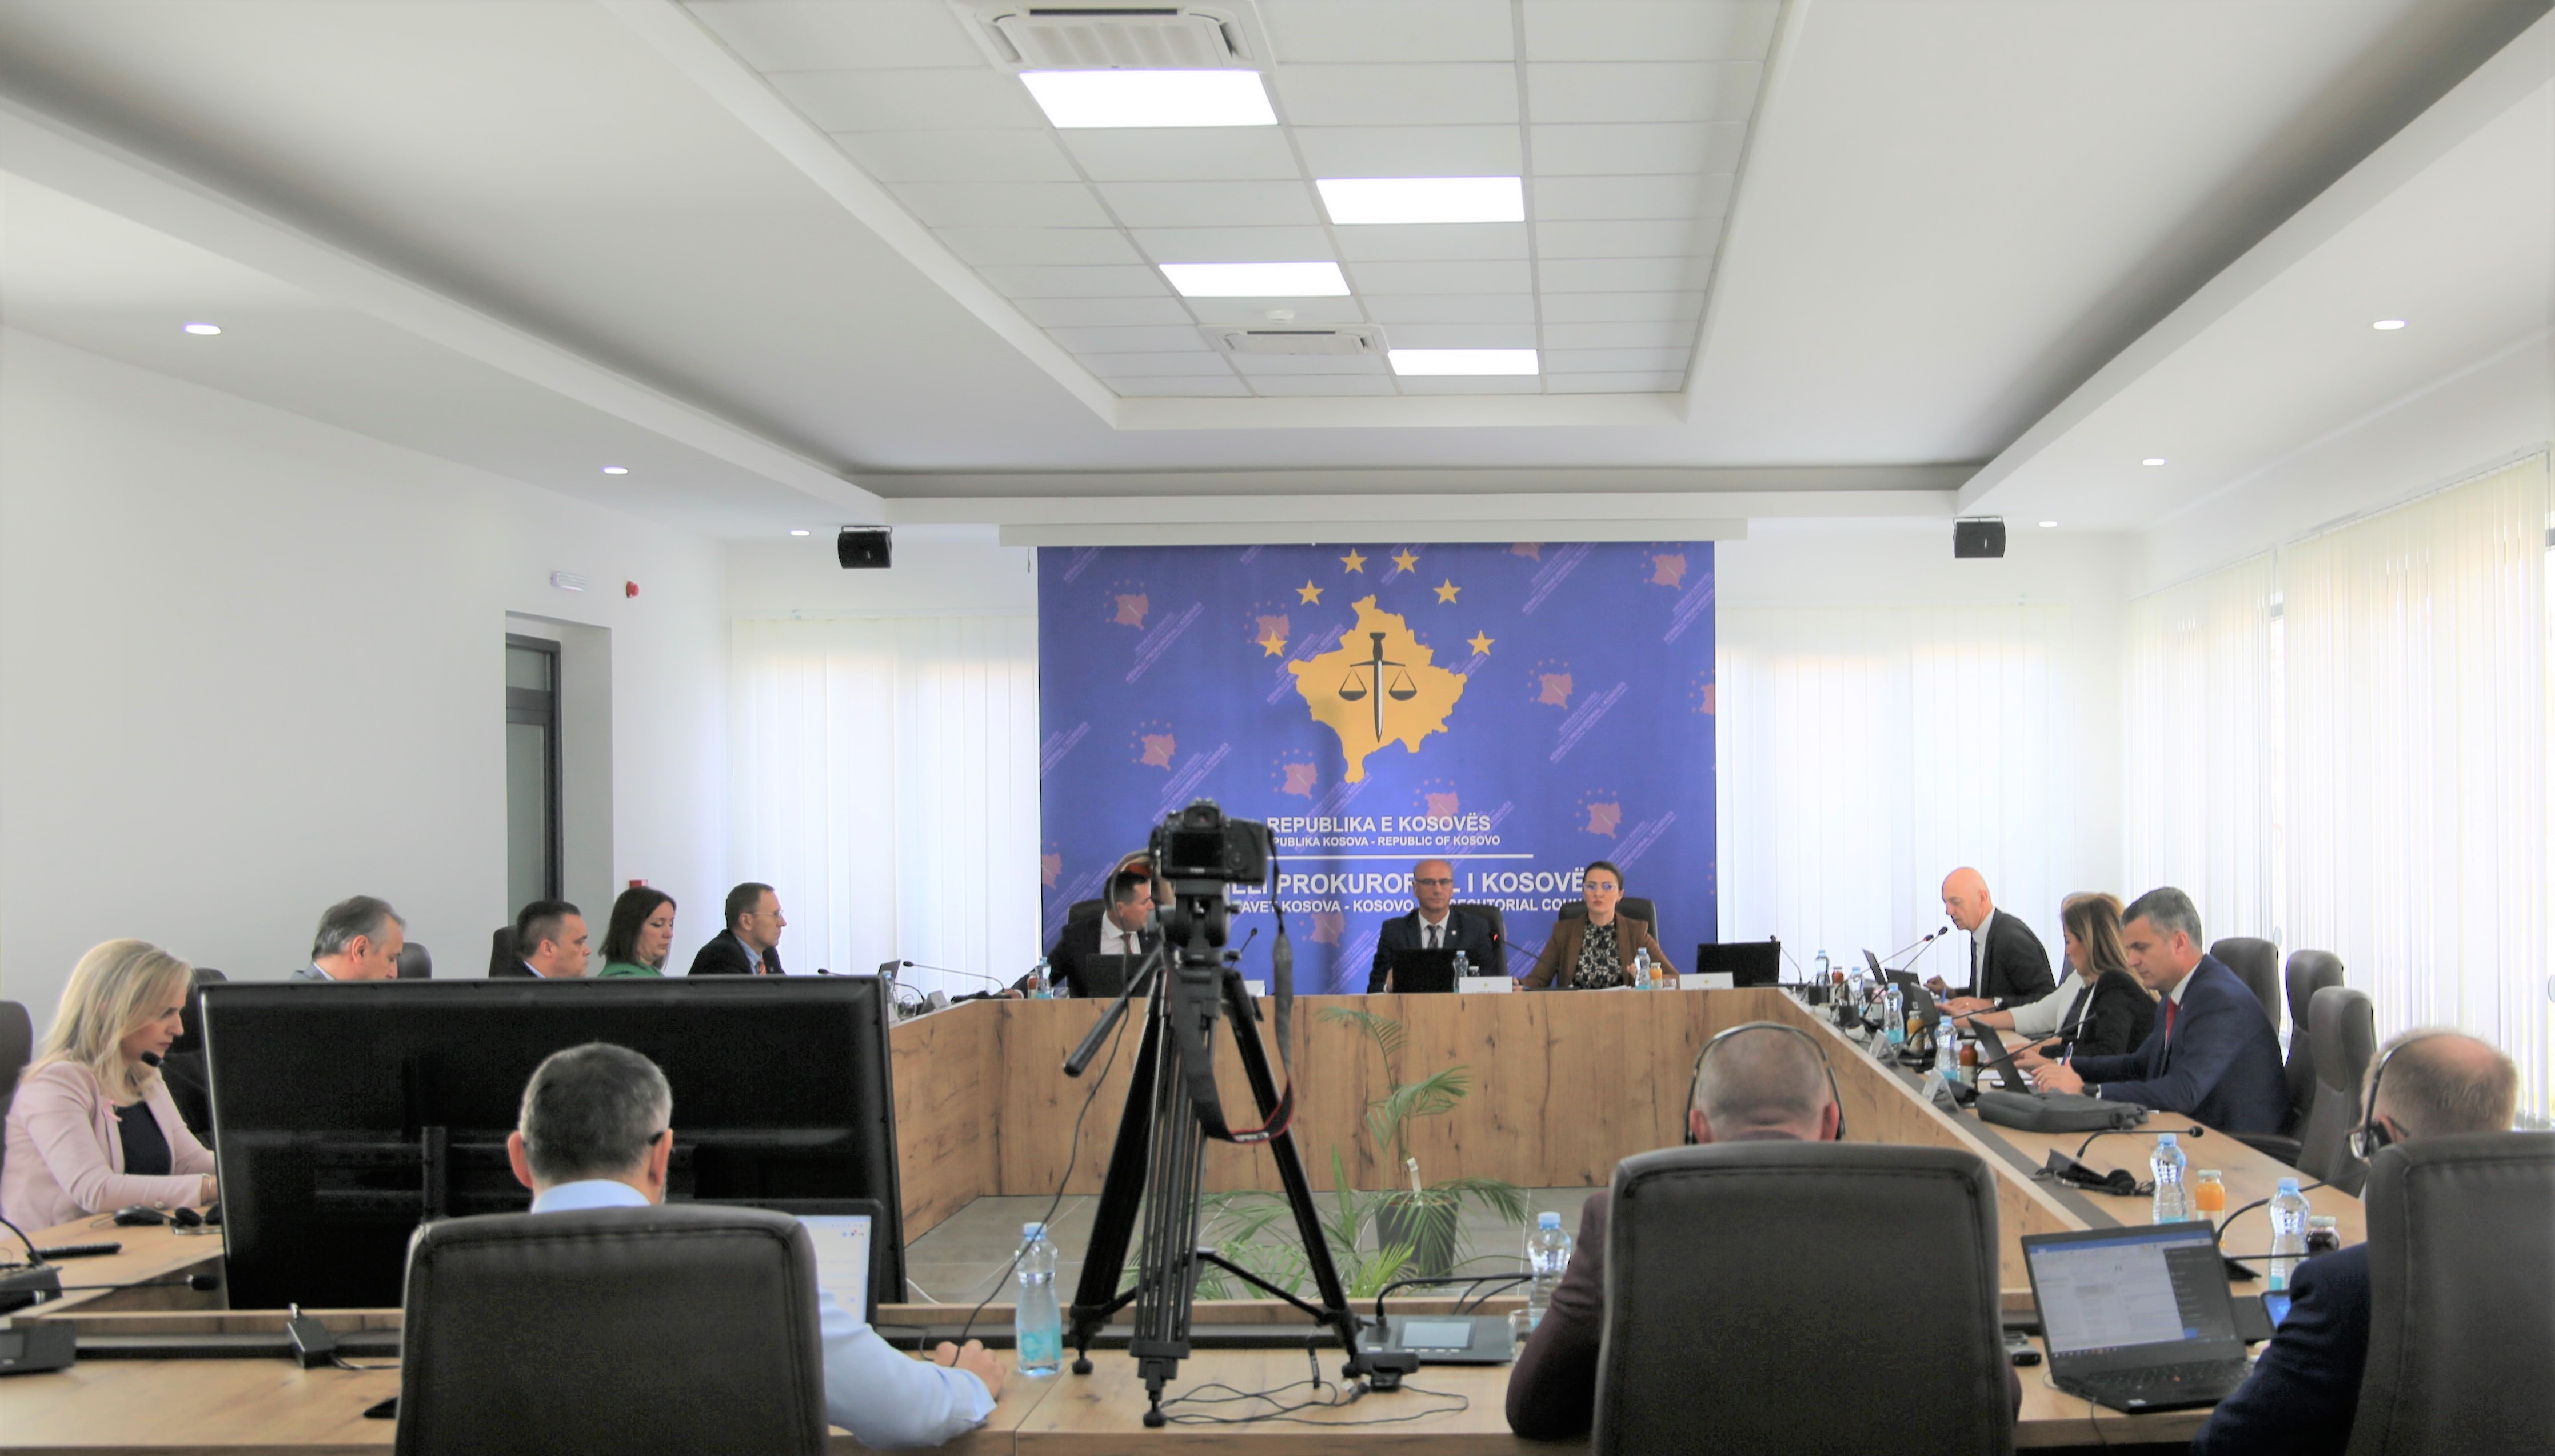 KPC ANNOUNCES COMPETITIONS FOR THE APPOINTMENT OF THE CHIEF PROSECUTOR OF THE SPECIAL PROSECUTOR'S OFFICE AND THE CHIEF PROSECUTOR OF THE BASIC PROSECUTOR'S OFFICE IN PRISTINA